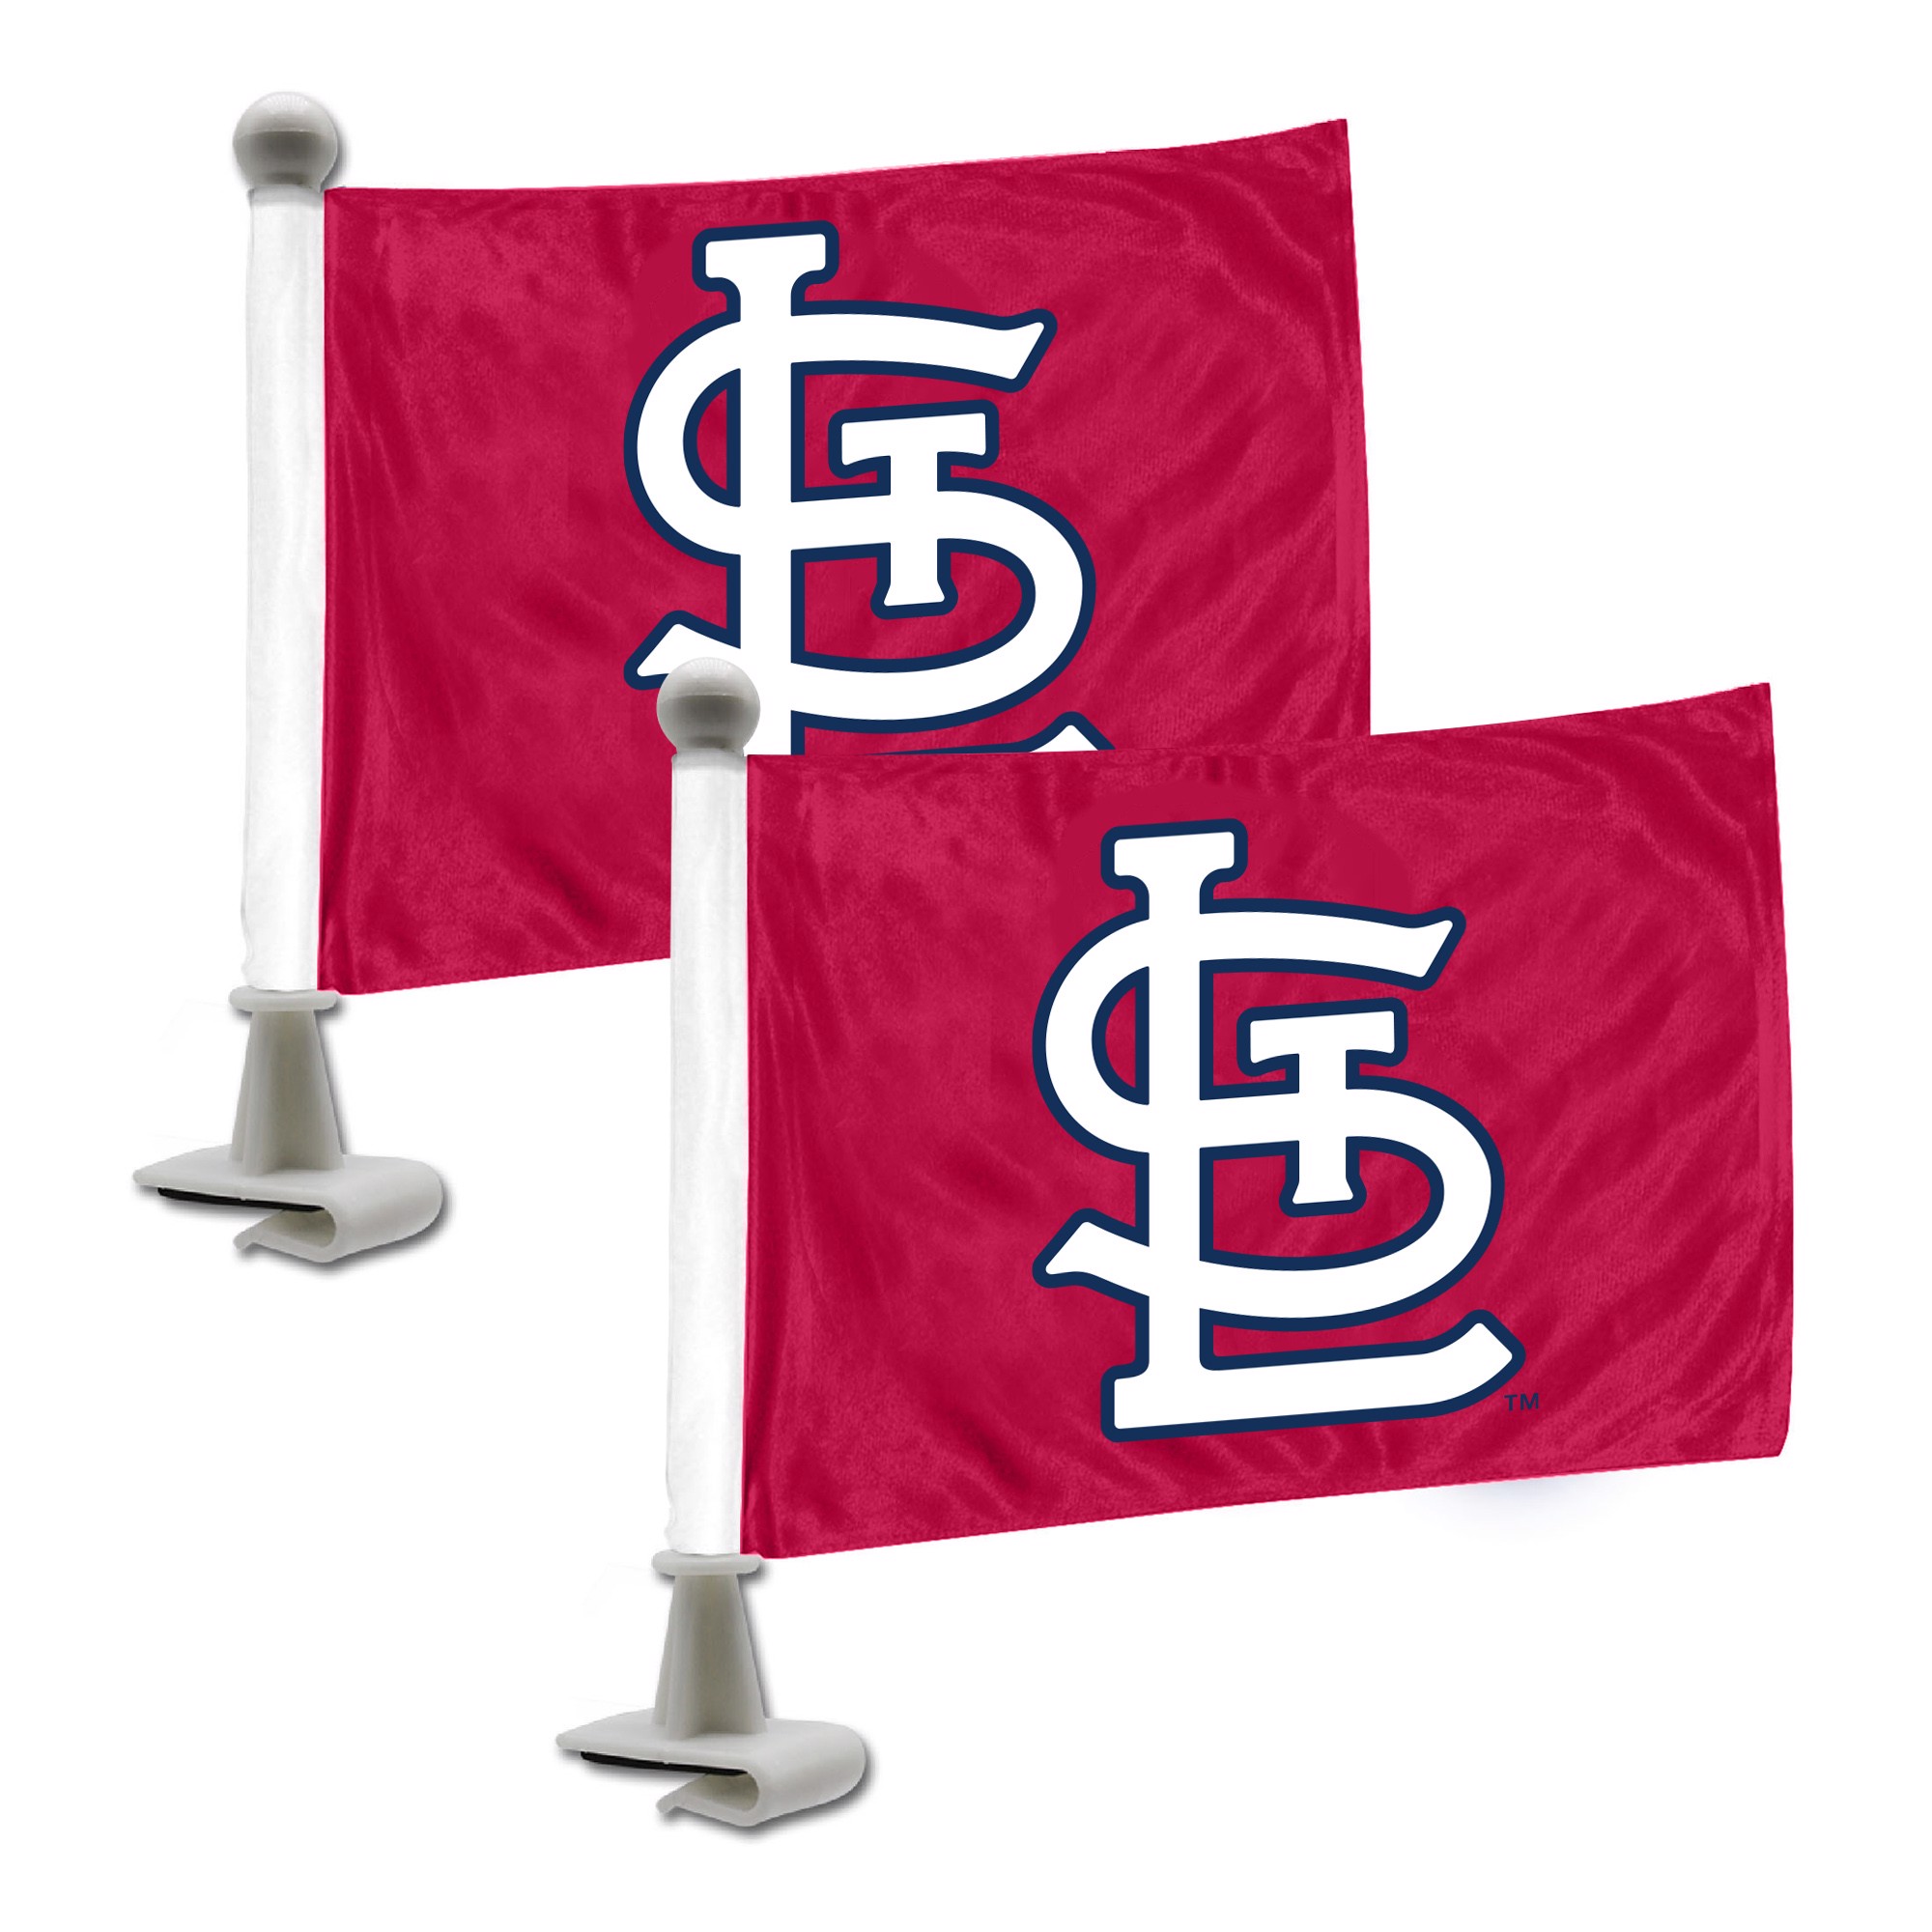 St. Louis Cardinals Cooperstown House Banner Flag